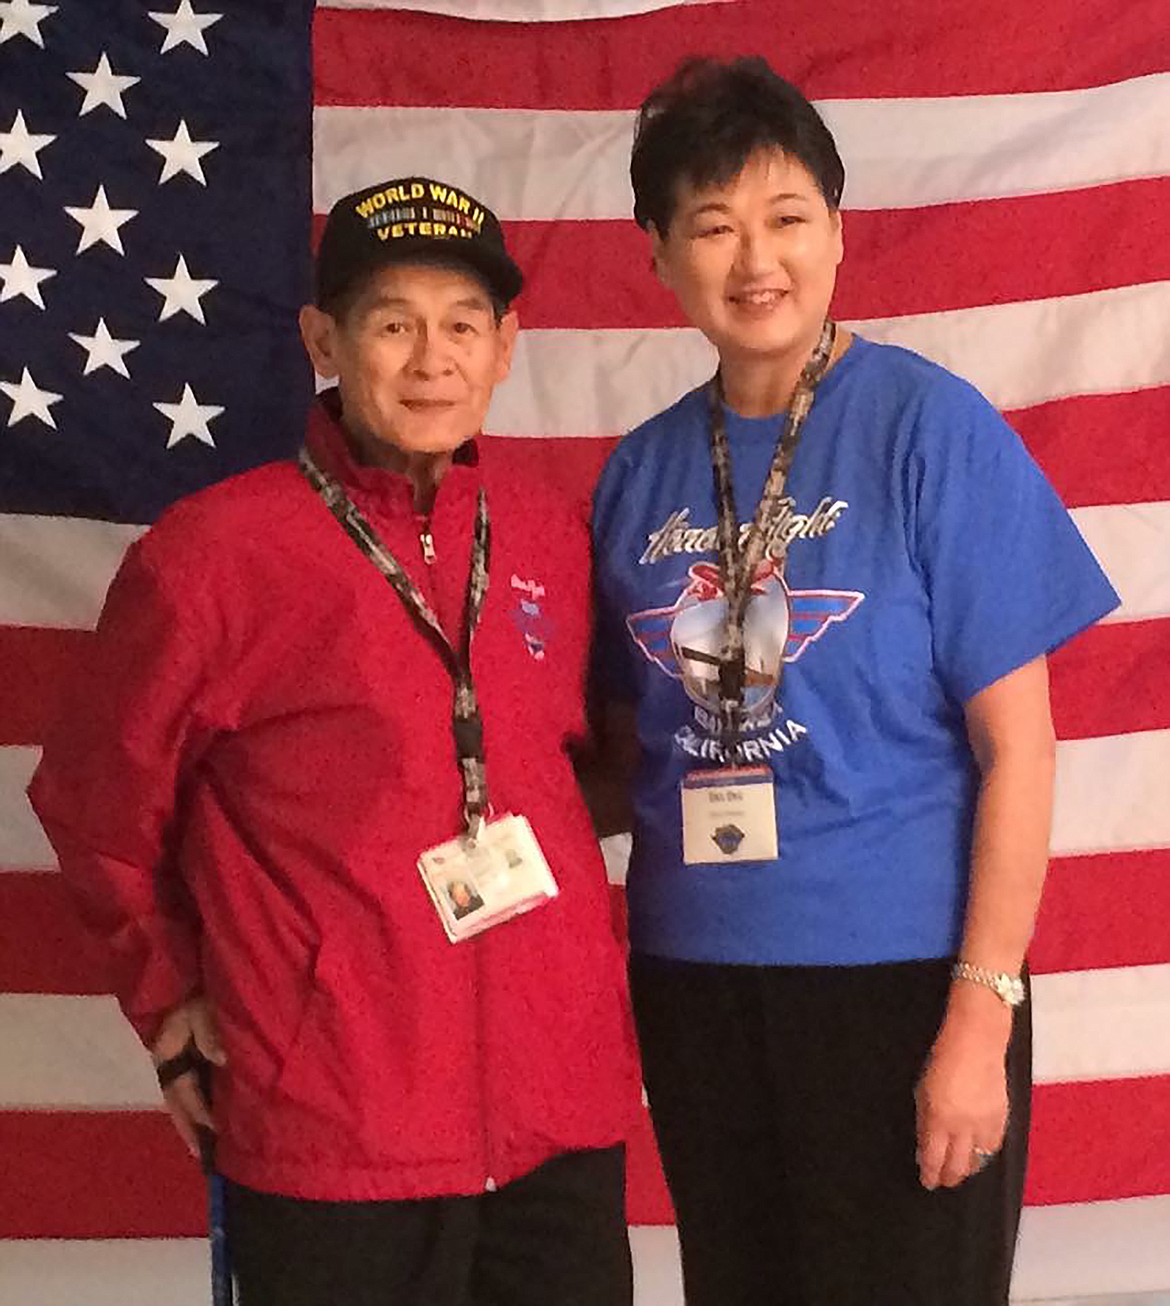 For his 92nd birthday in 2017, Delia (Dee Dee) Freney of Sandpoint, took her father, World War II and Korean War veteran George Dong, also of Sandpoint, on the Honor Flight to Washington, D.C., where he was able to visit the World War II Memorial.